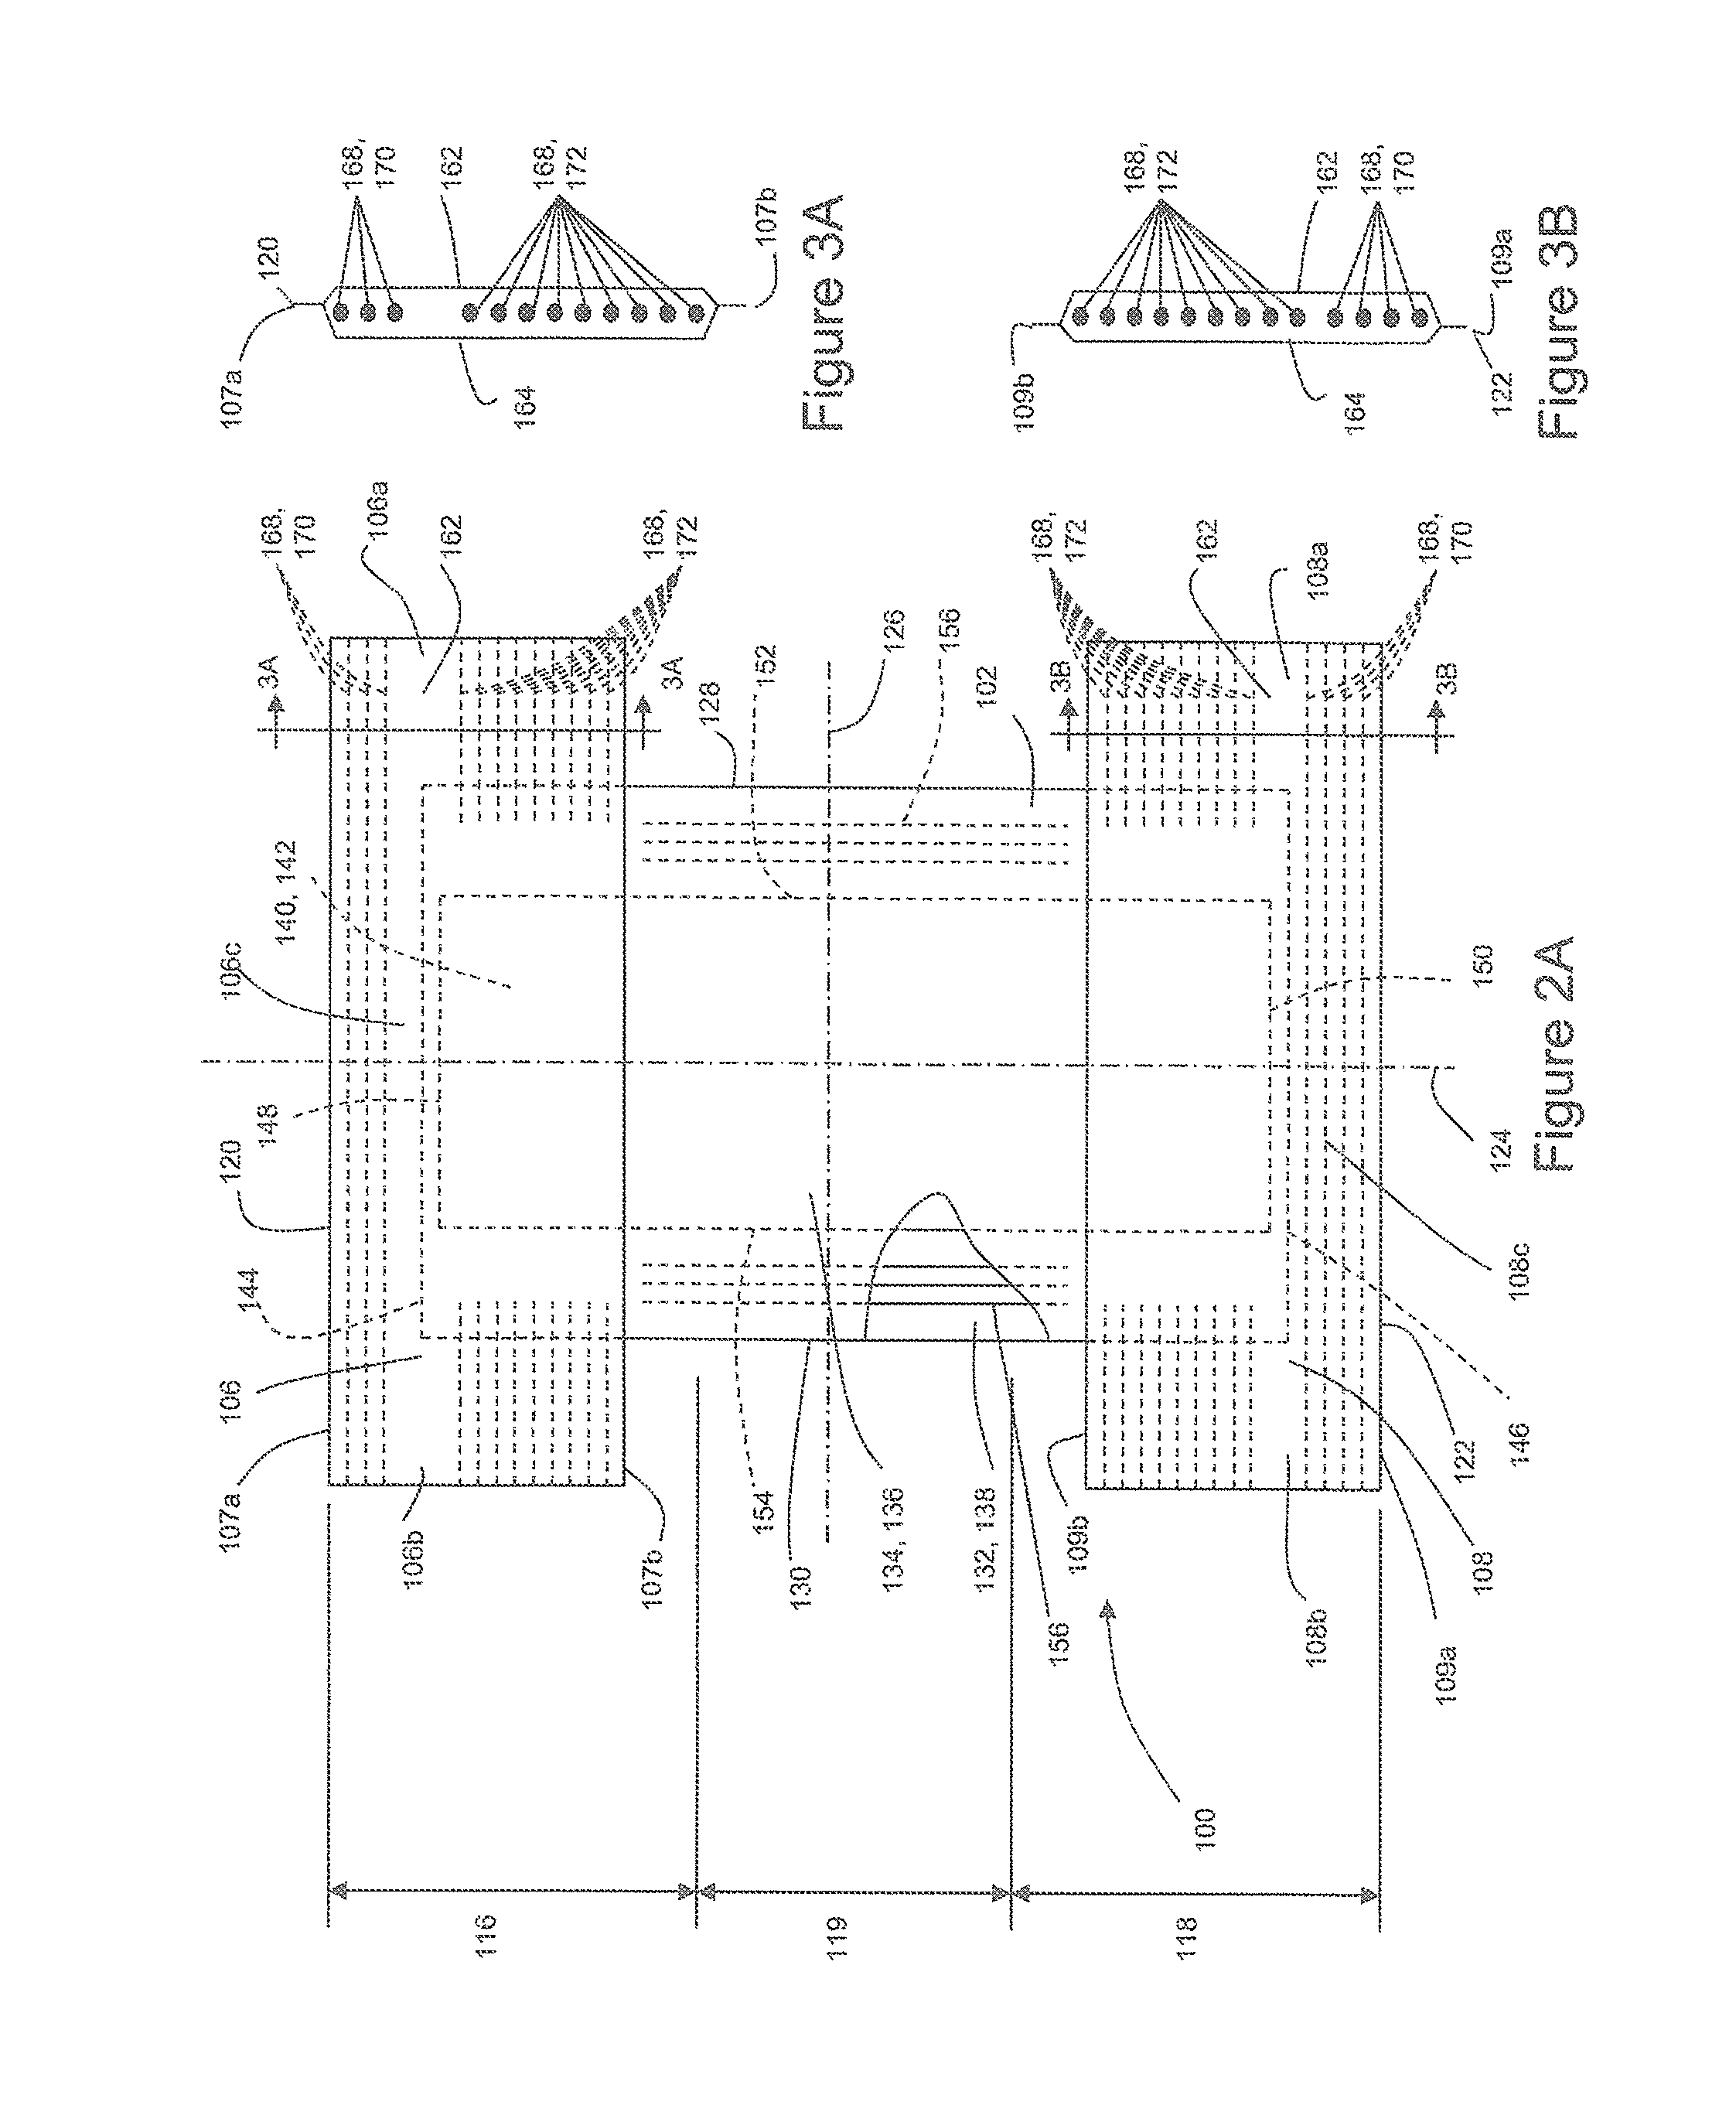 Absorbent article process and apparatus for intermittently deactivating elastics in elastic laminates